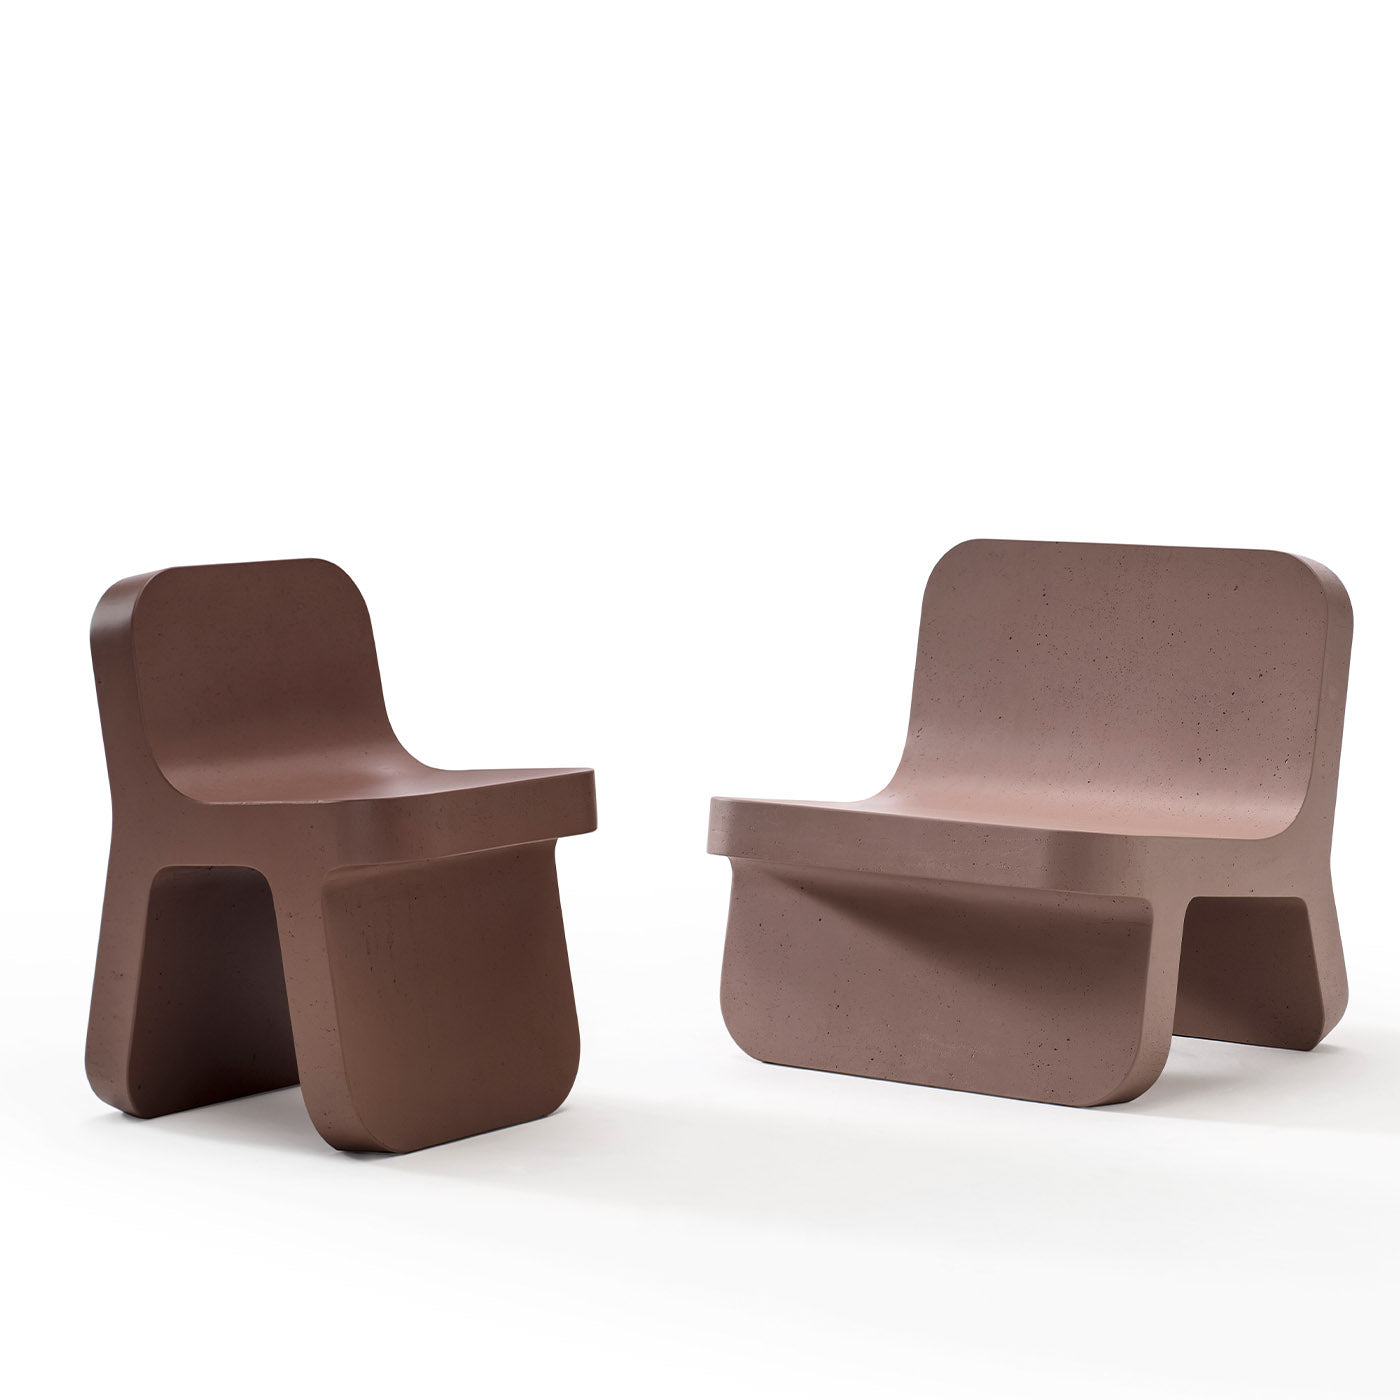 Torcello Lounge Chair by Defne Koz and Marco Susani - Alternative view 2